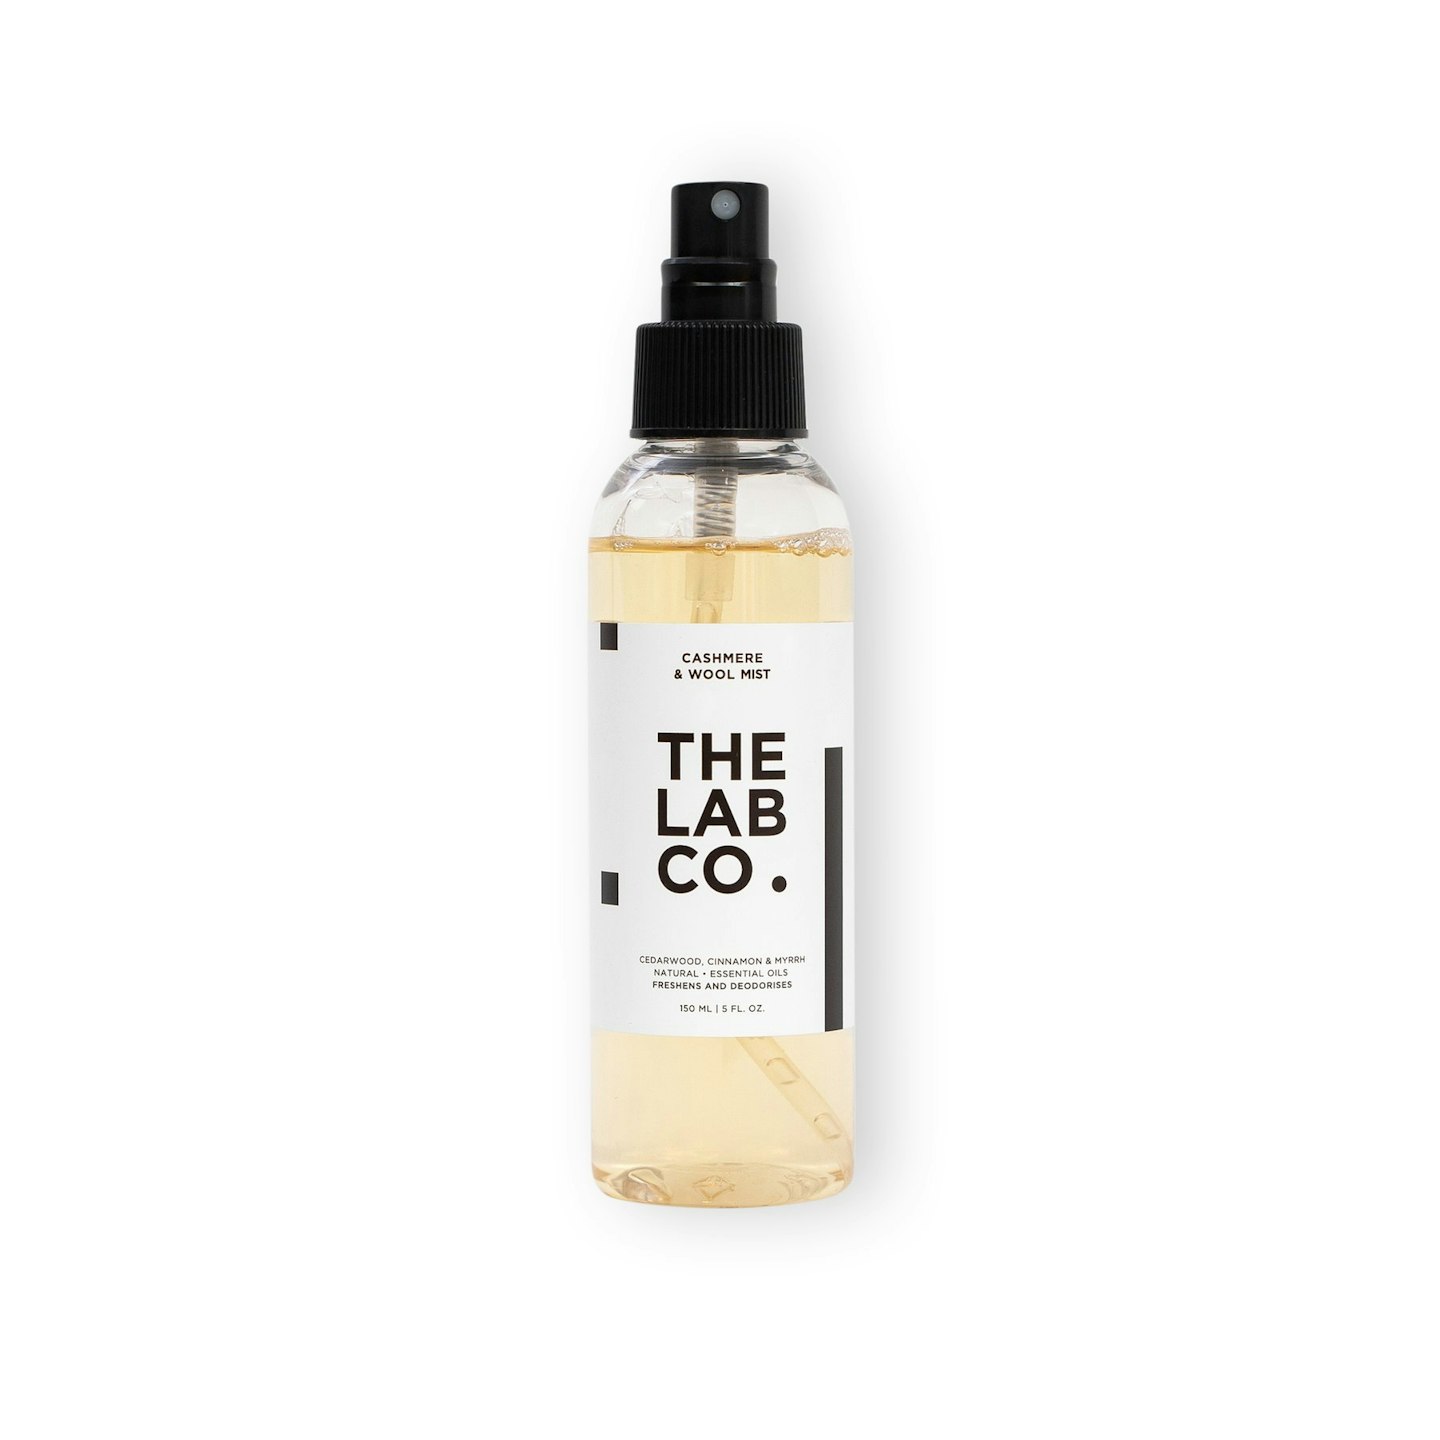 The Lab Co, Cashmere & Wool Mist, £9